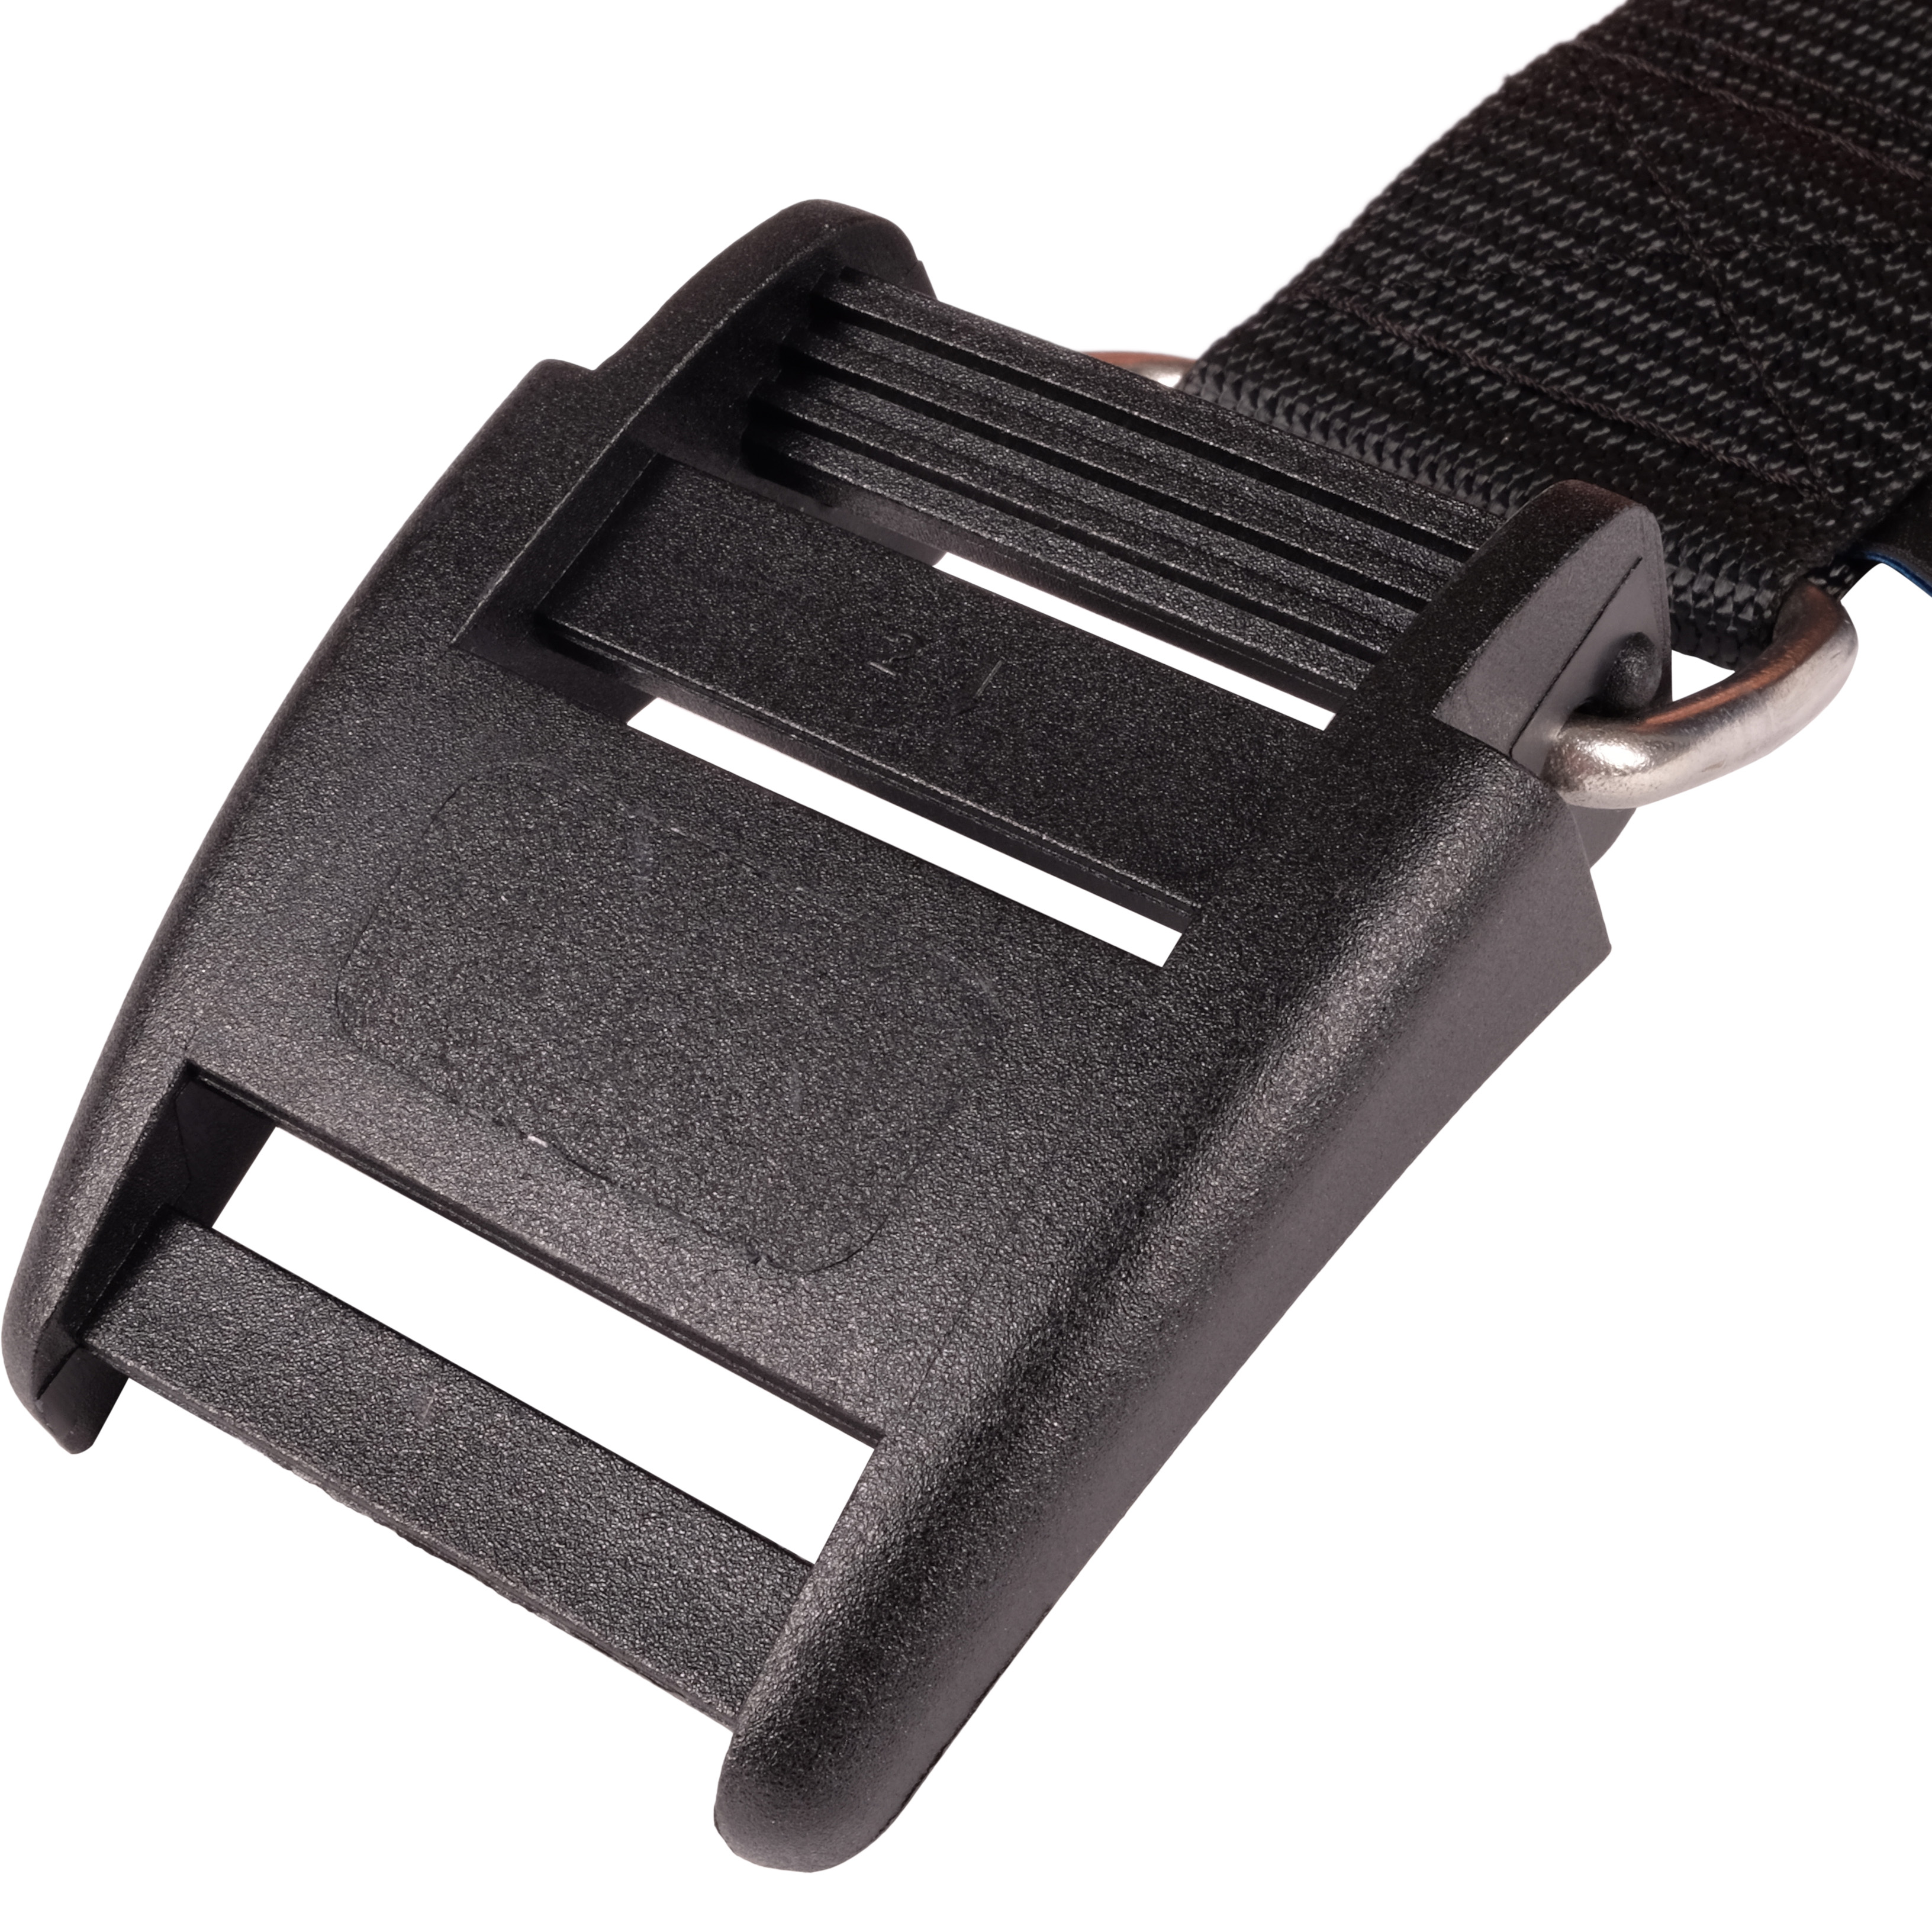 DIR ZONE Tank Bands with Delrin Buckles (1 Pair)